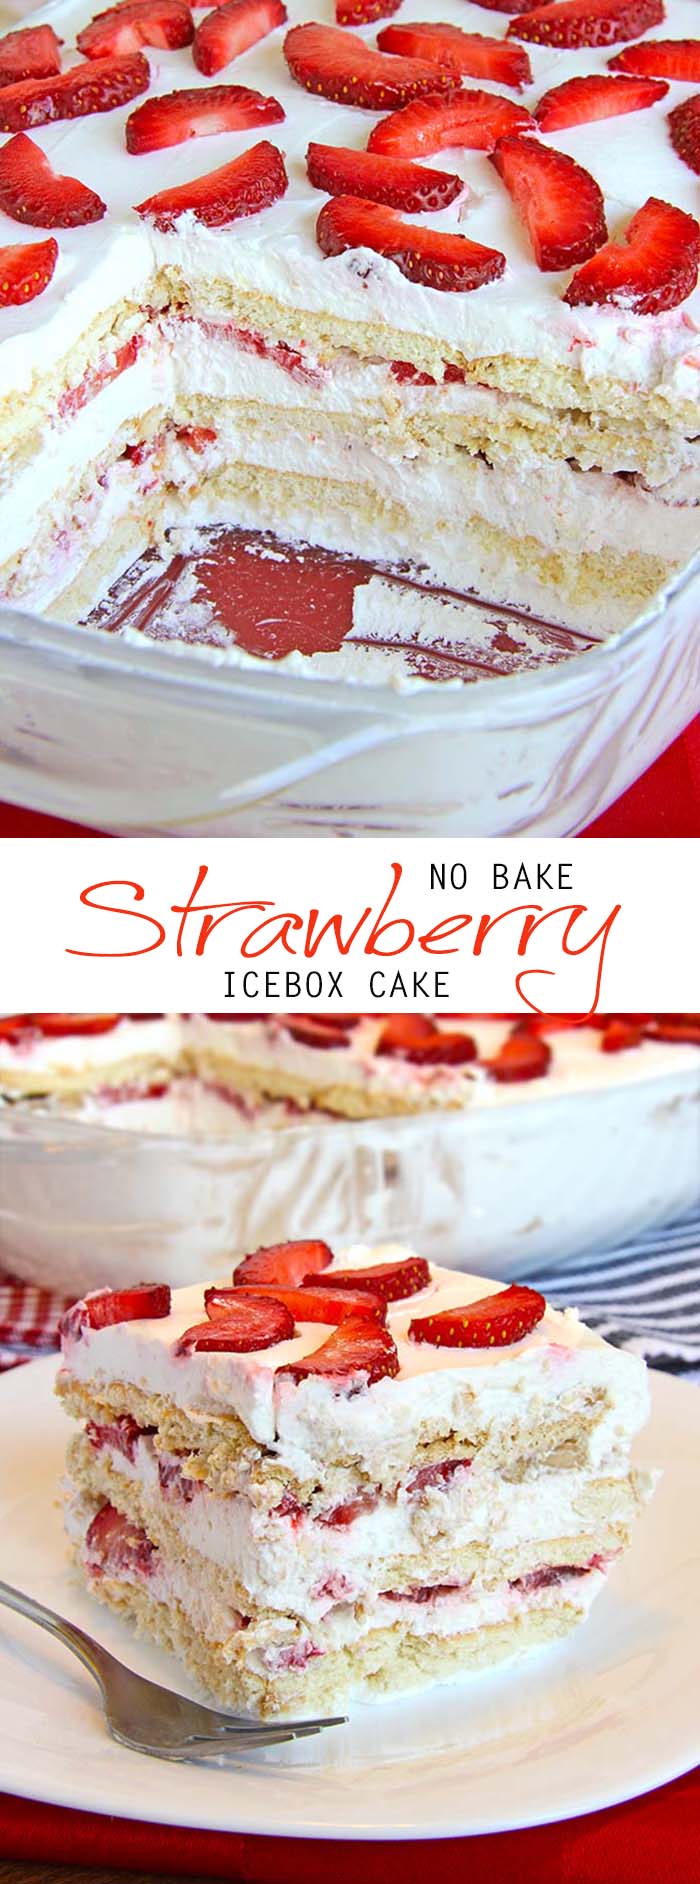 Looking for a quick and easy Spring/Summer dessert recipe? Try out delicious No Bake Strawberry Icebox Cake !